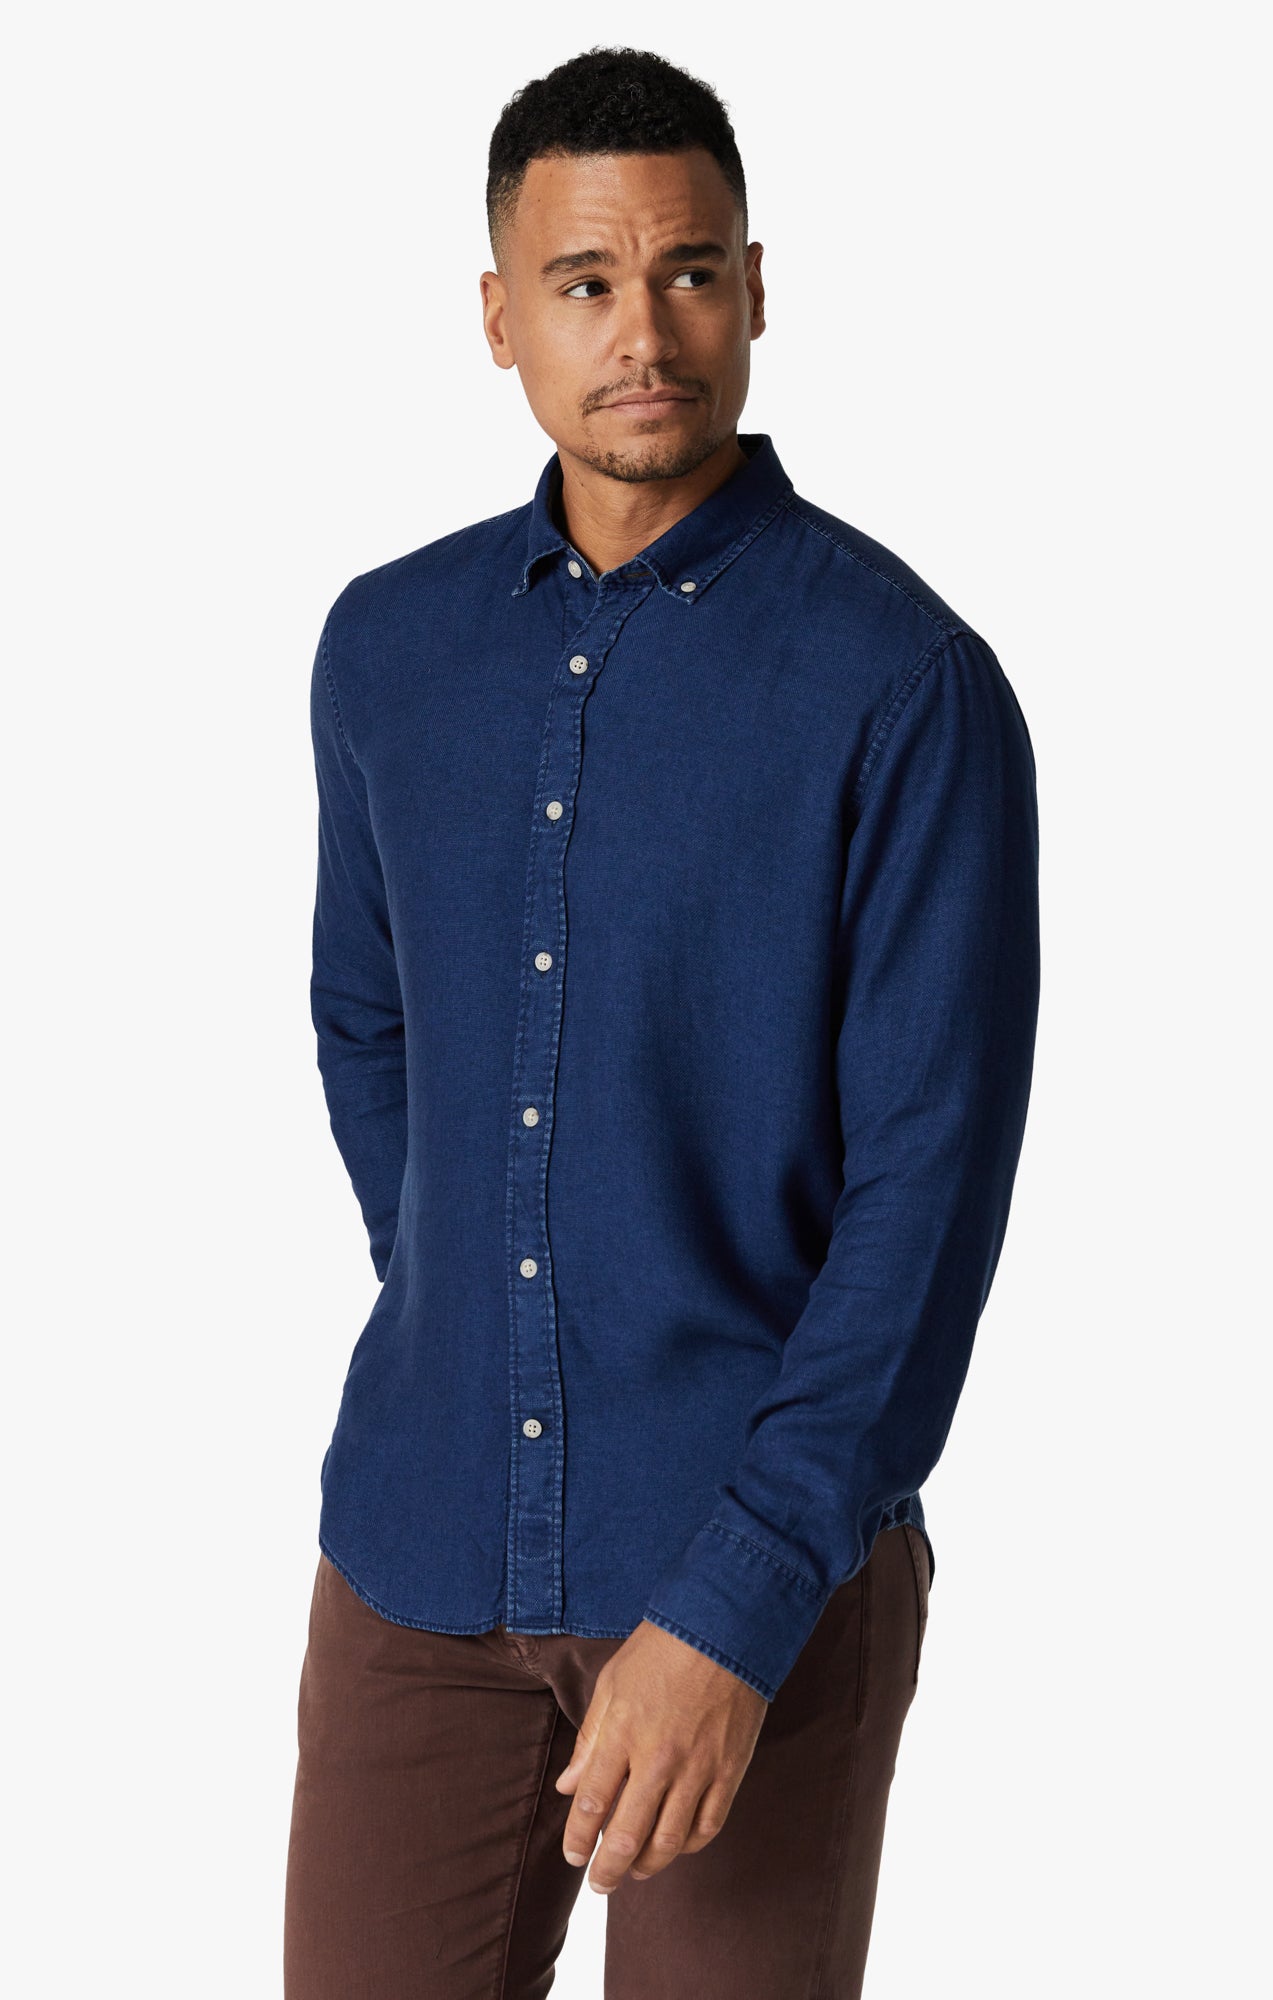 Luxury shirt for men - Dsquared2 dark blue denim shirt with paint stain  effect